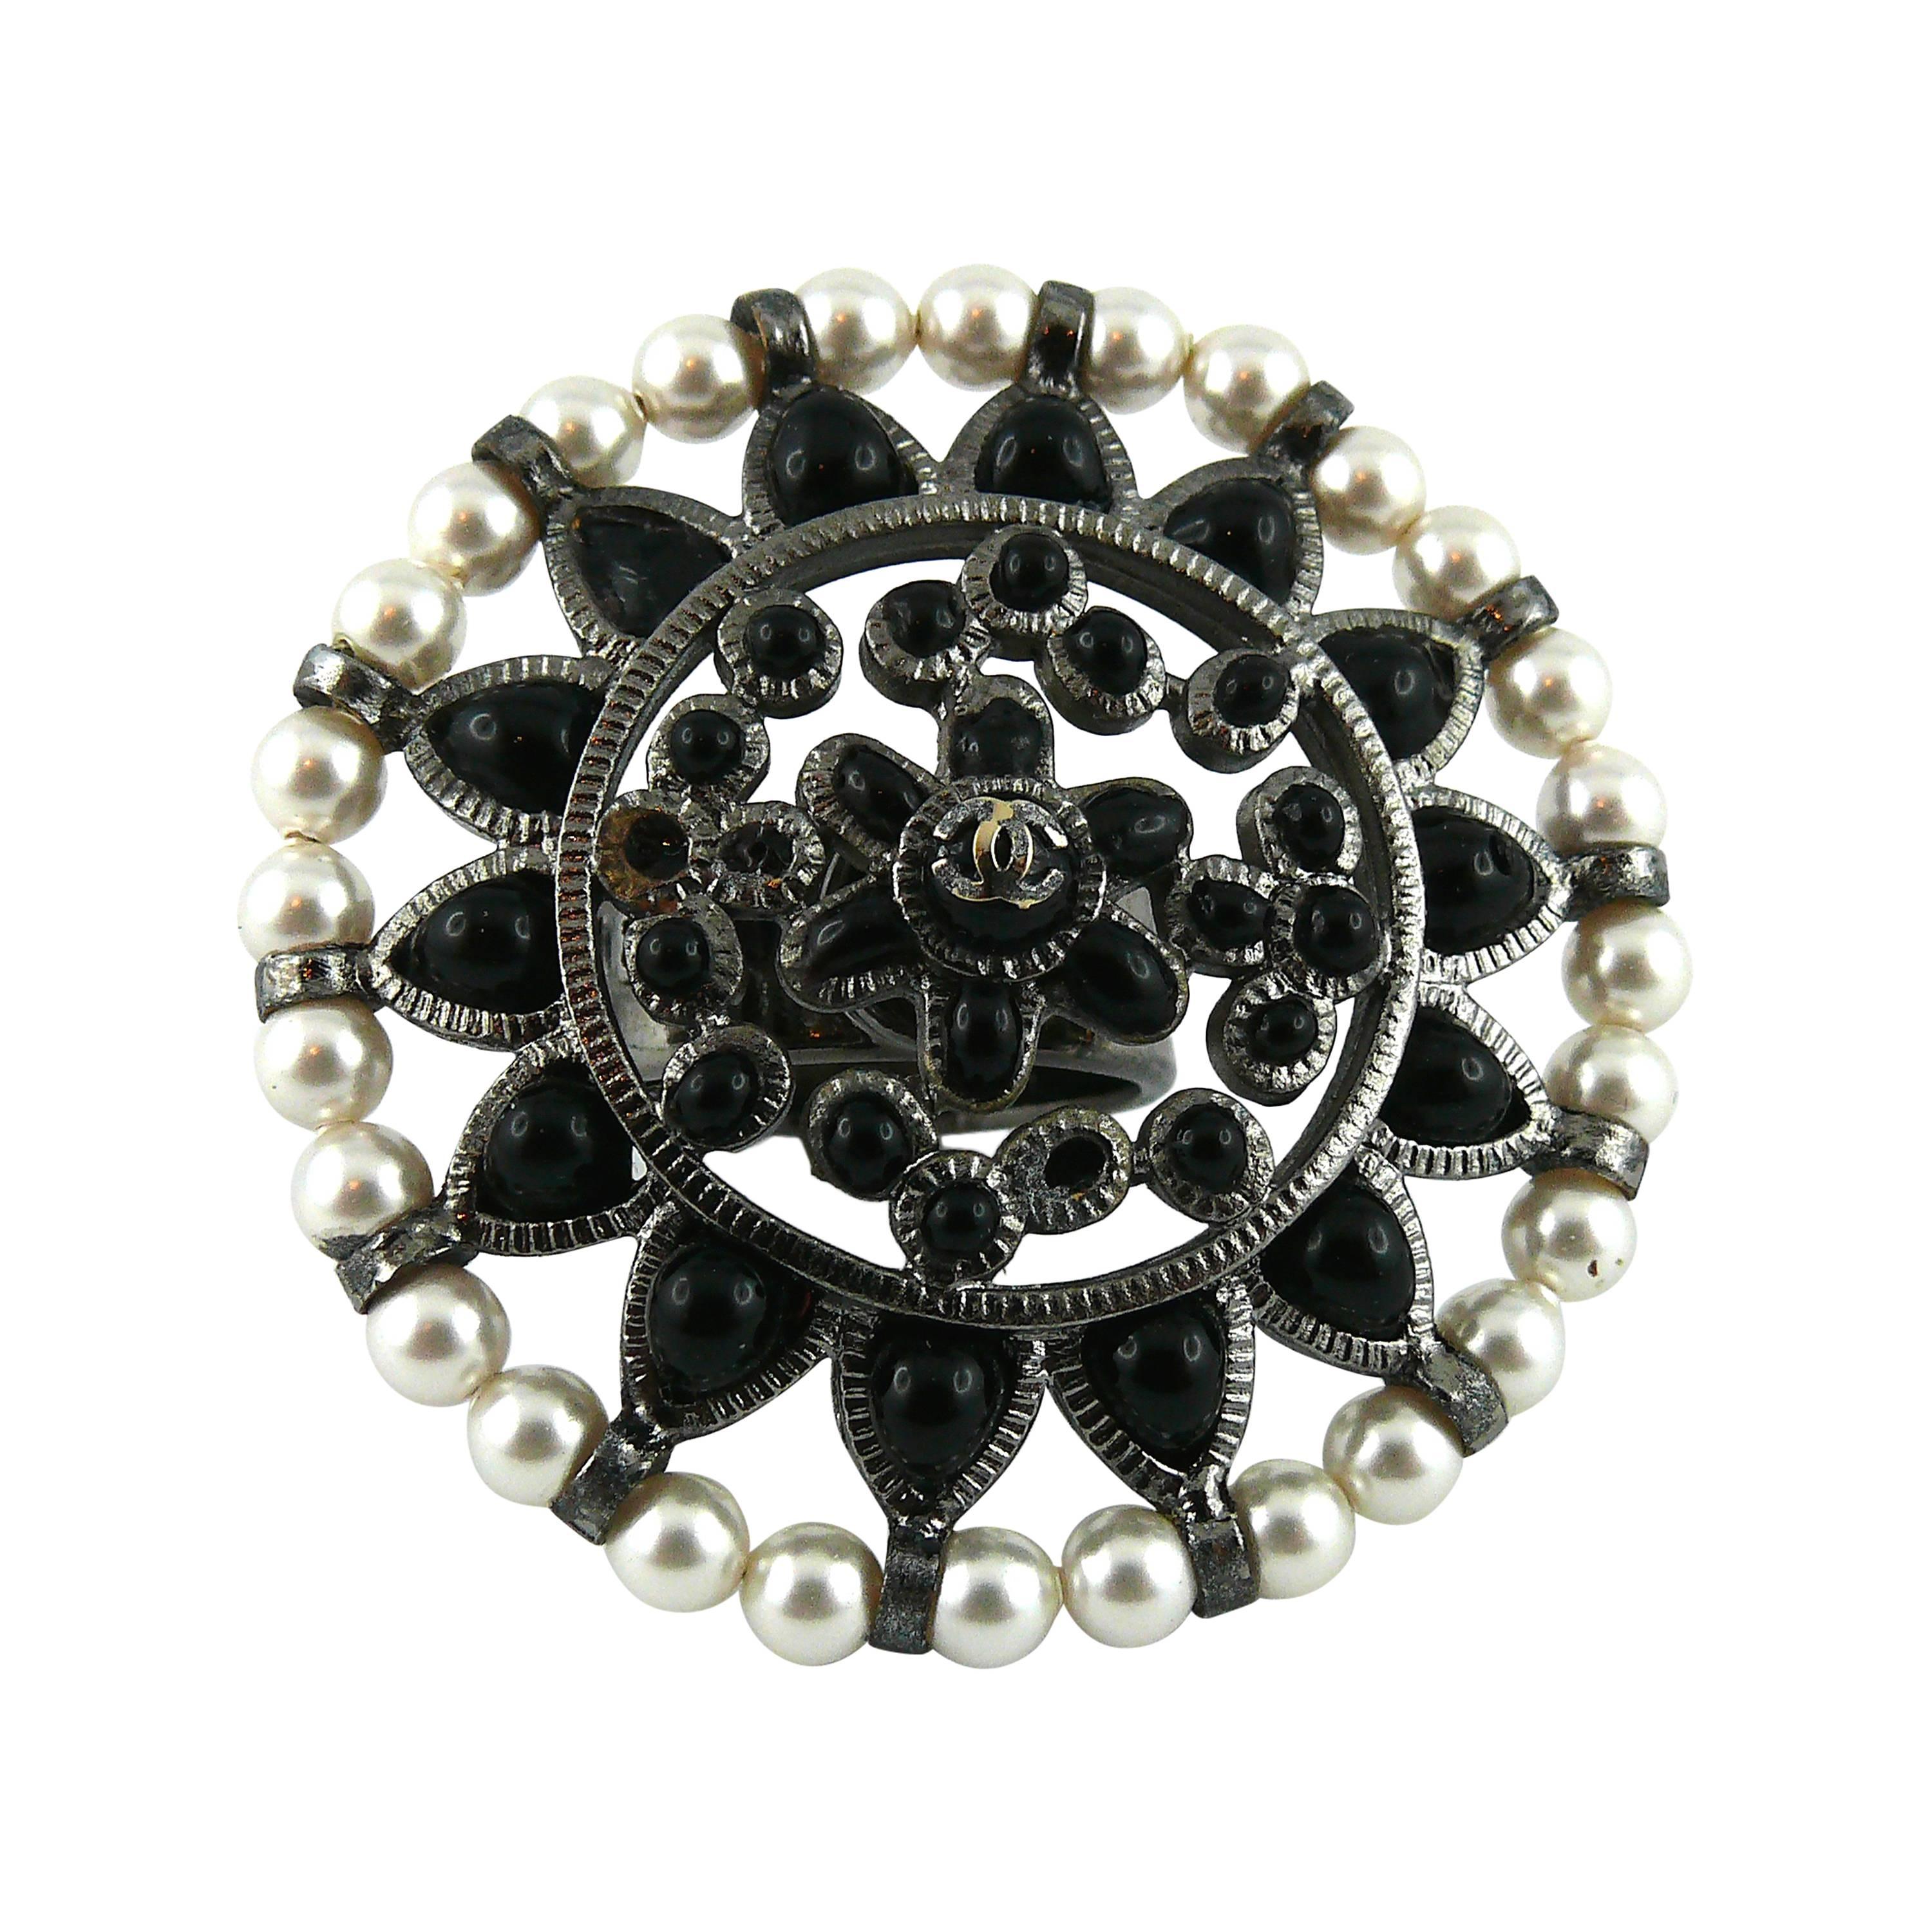 Chanel Black and White Couture Flower Ring US Size 6 3/4